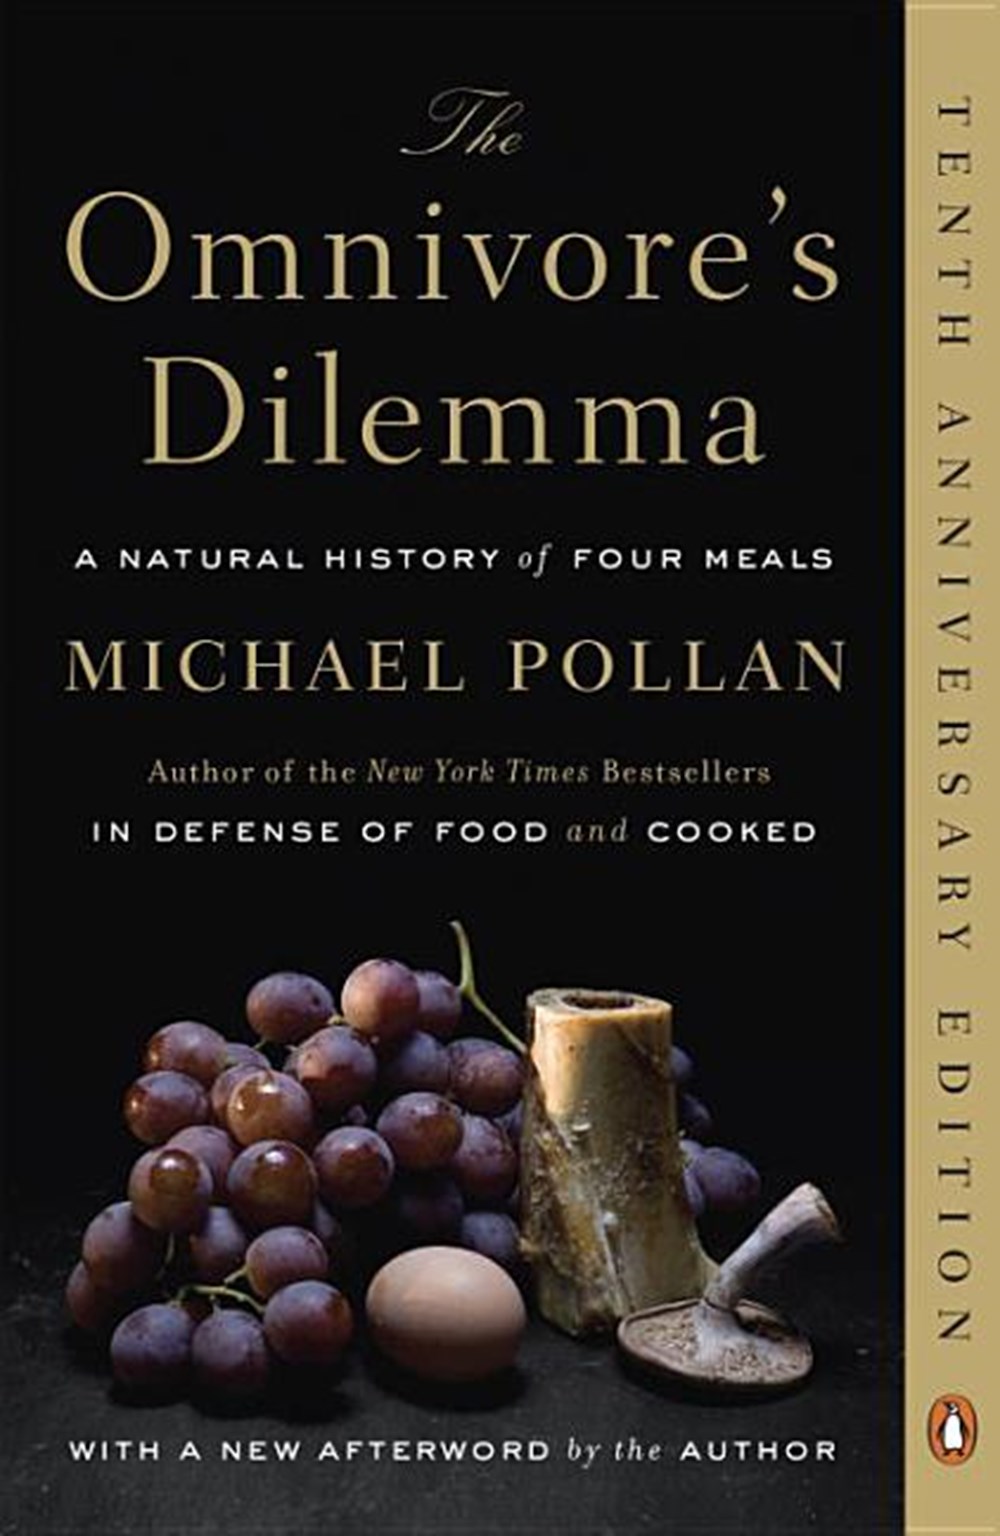 Omnivore's Dilemma A Natural History of Four Meals